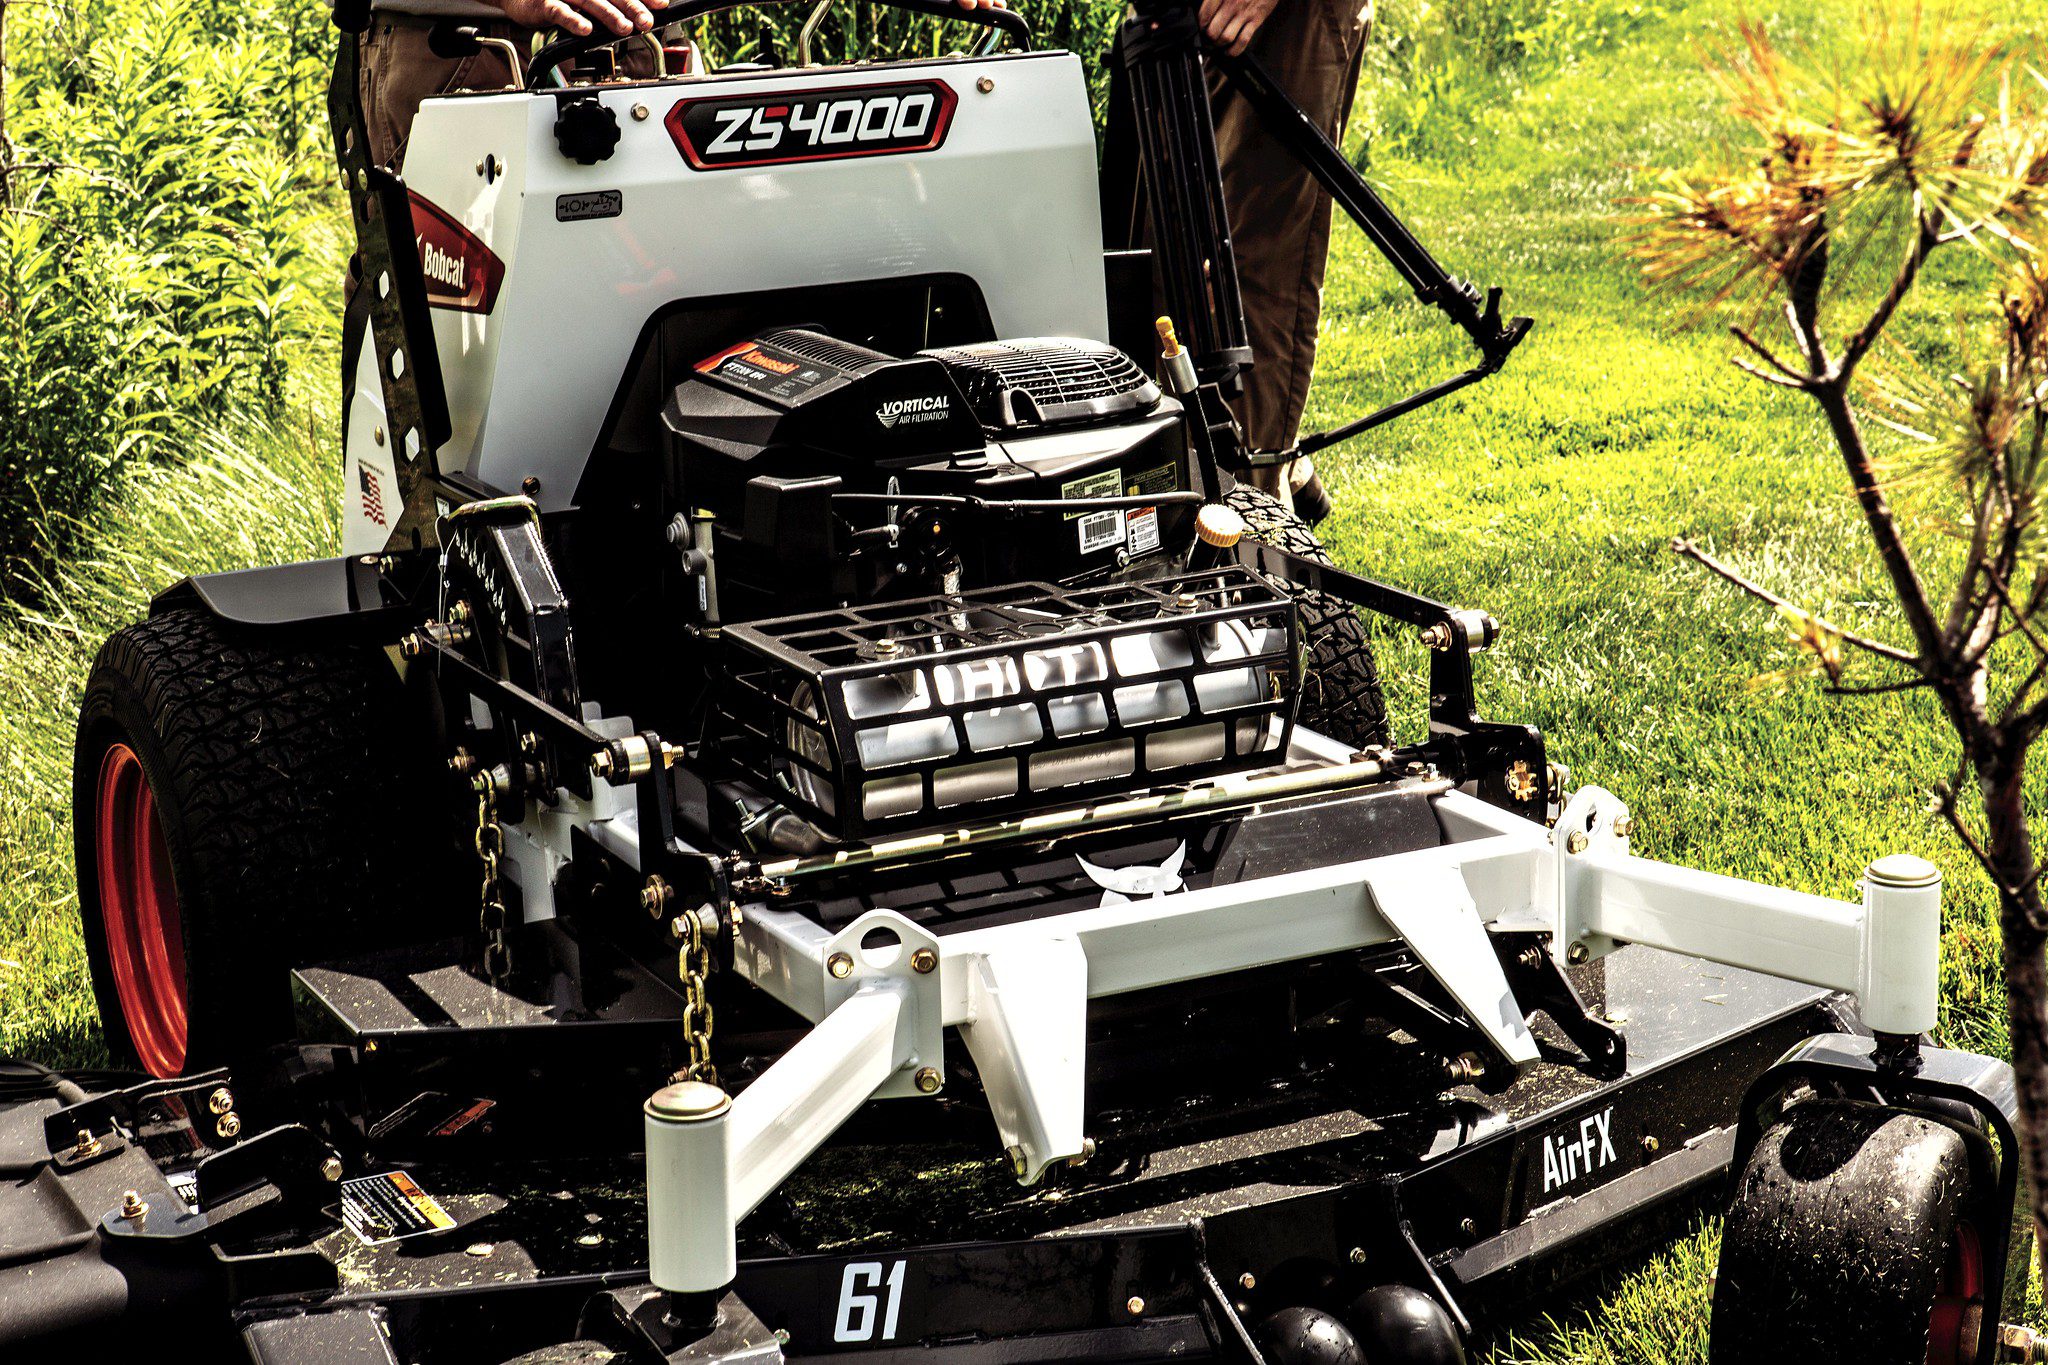 Browse Specs and more for the Bobcat ZS4000 Stand-On Mower 48″ - Bobcat of the Rockies